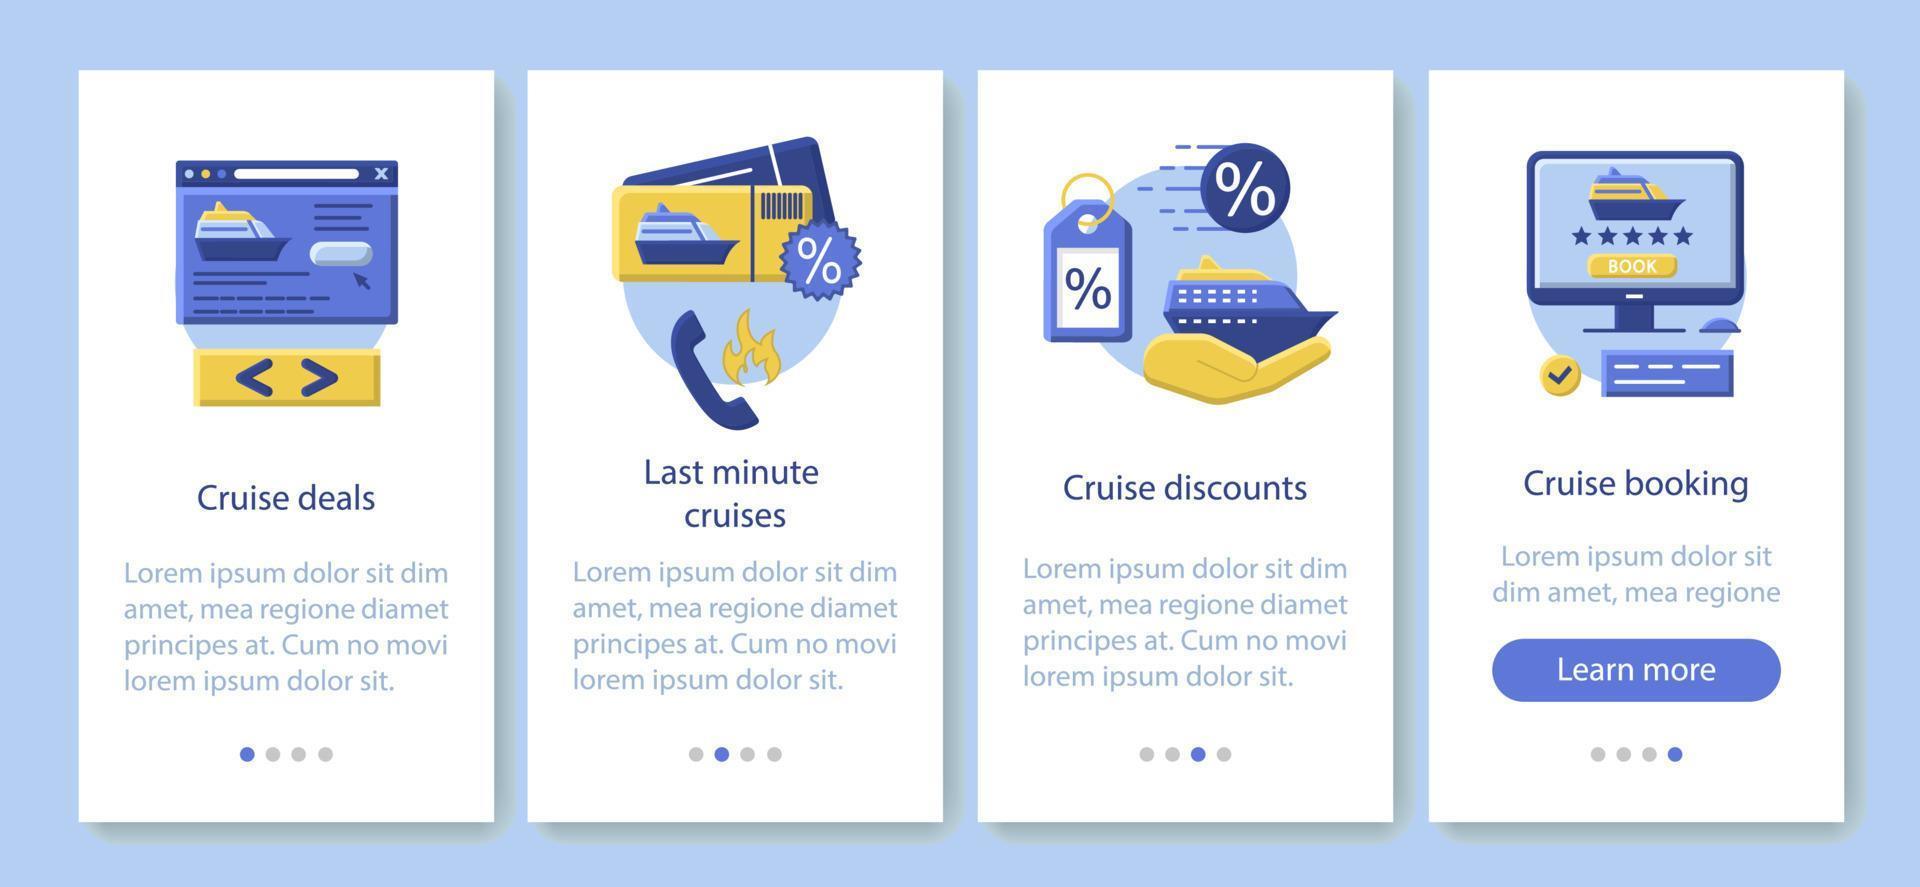 Cruise onboarding mobile app page screen vector template. Deals, last minute cruises, discounts, booking. Flat design website instructions. UX, UI, GUI smartphone interface cartoon concept